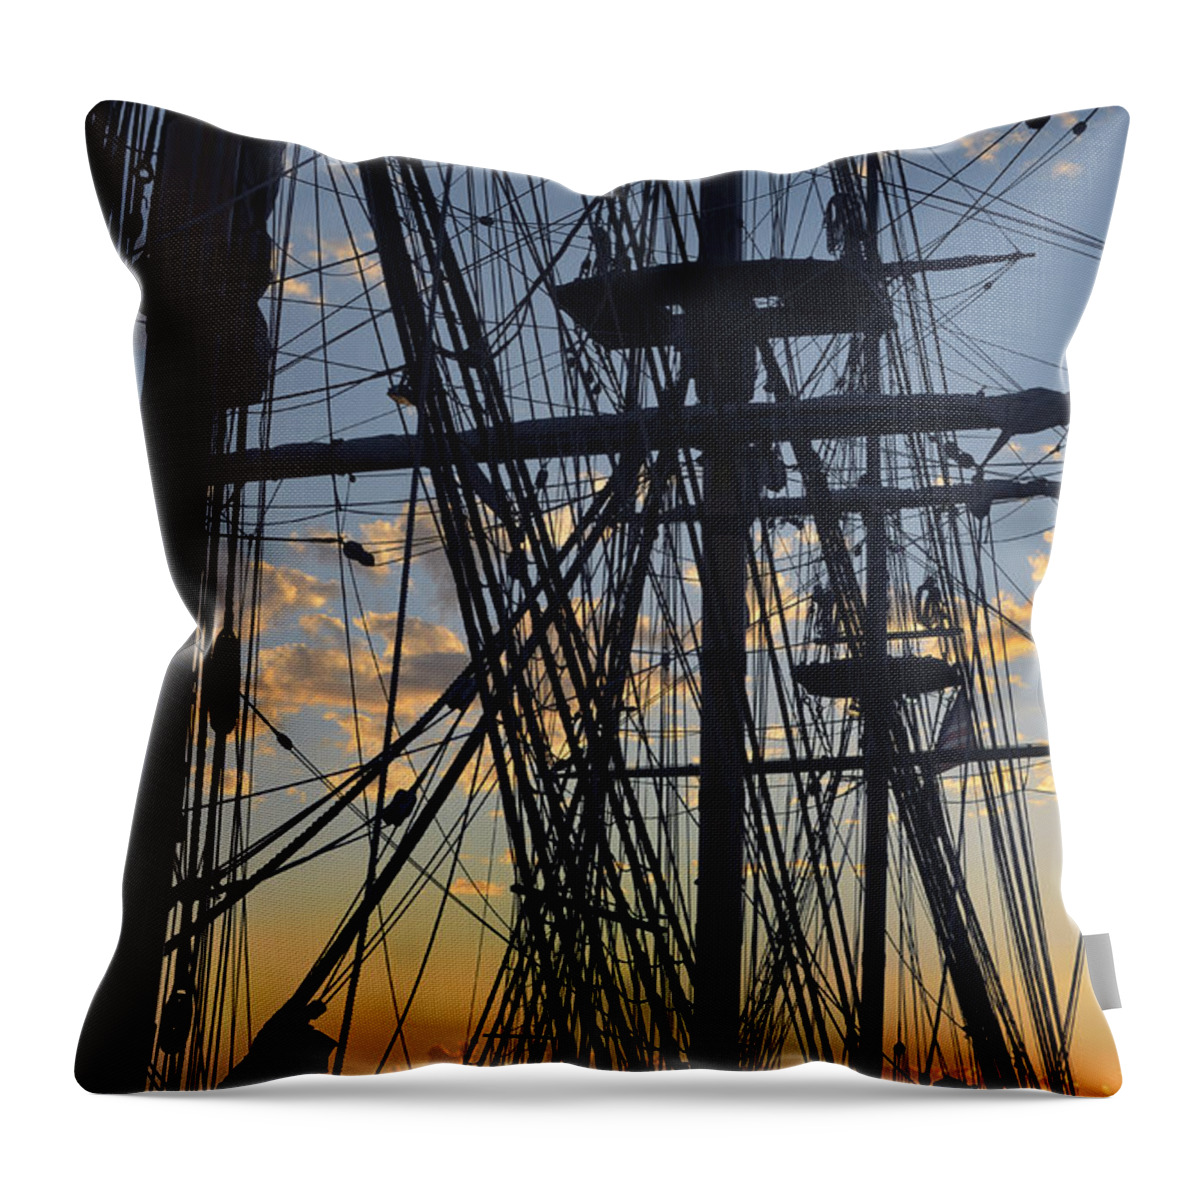 Tall Ships Throw Pillow featuring the photograph San Diego Sunset by Marianne Campolongo